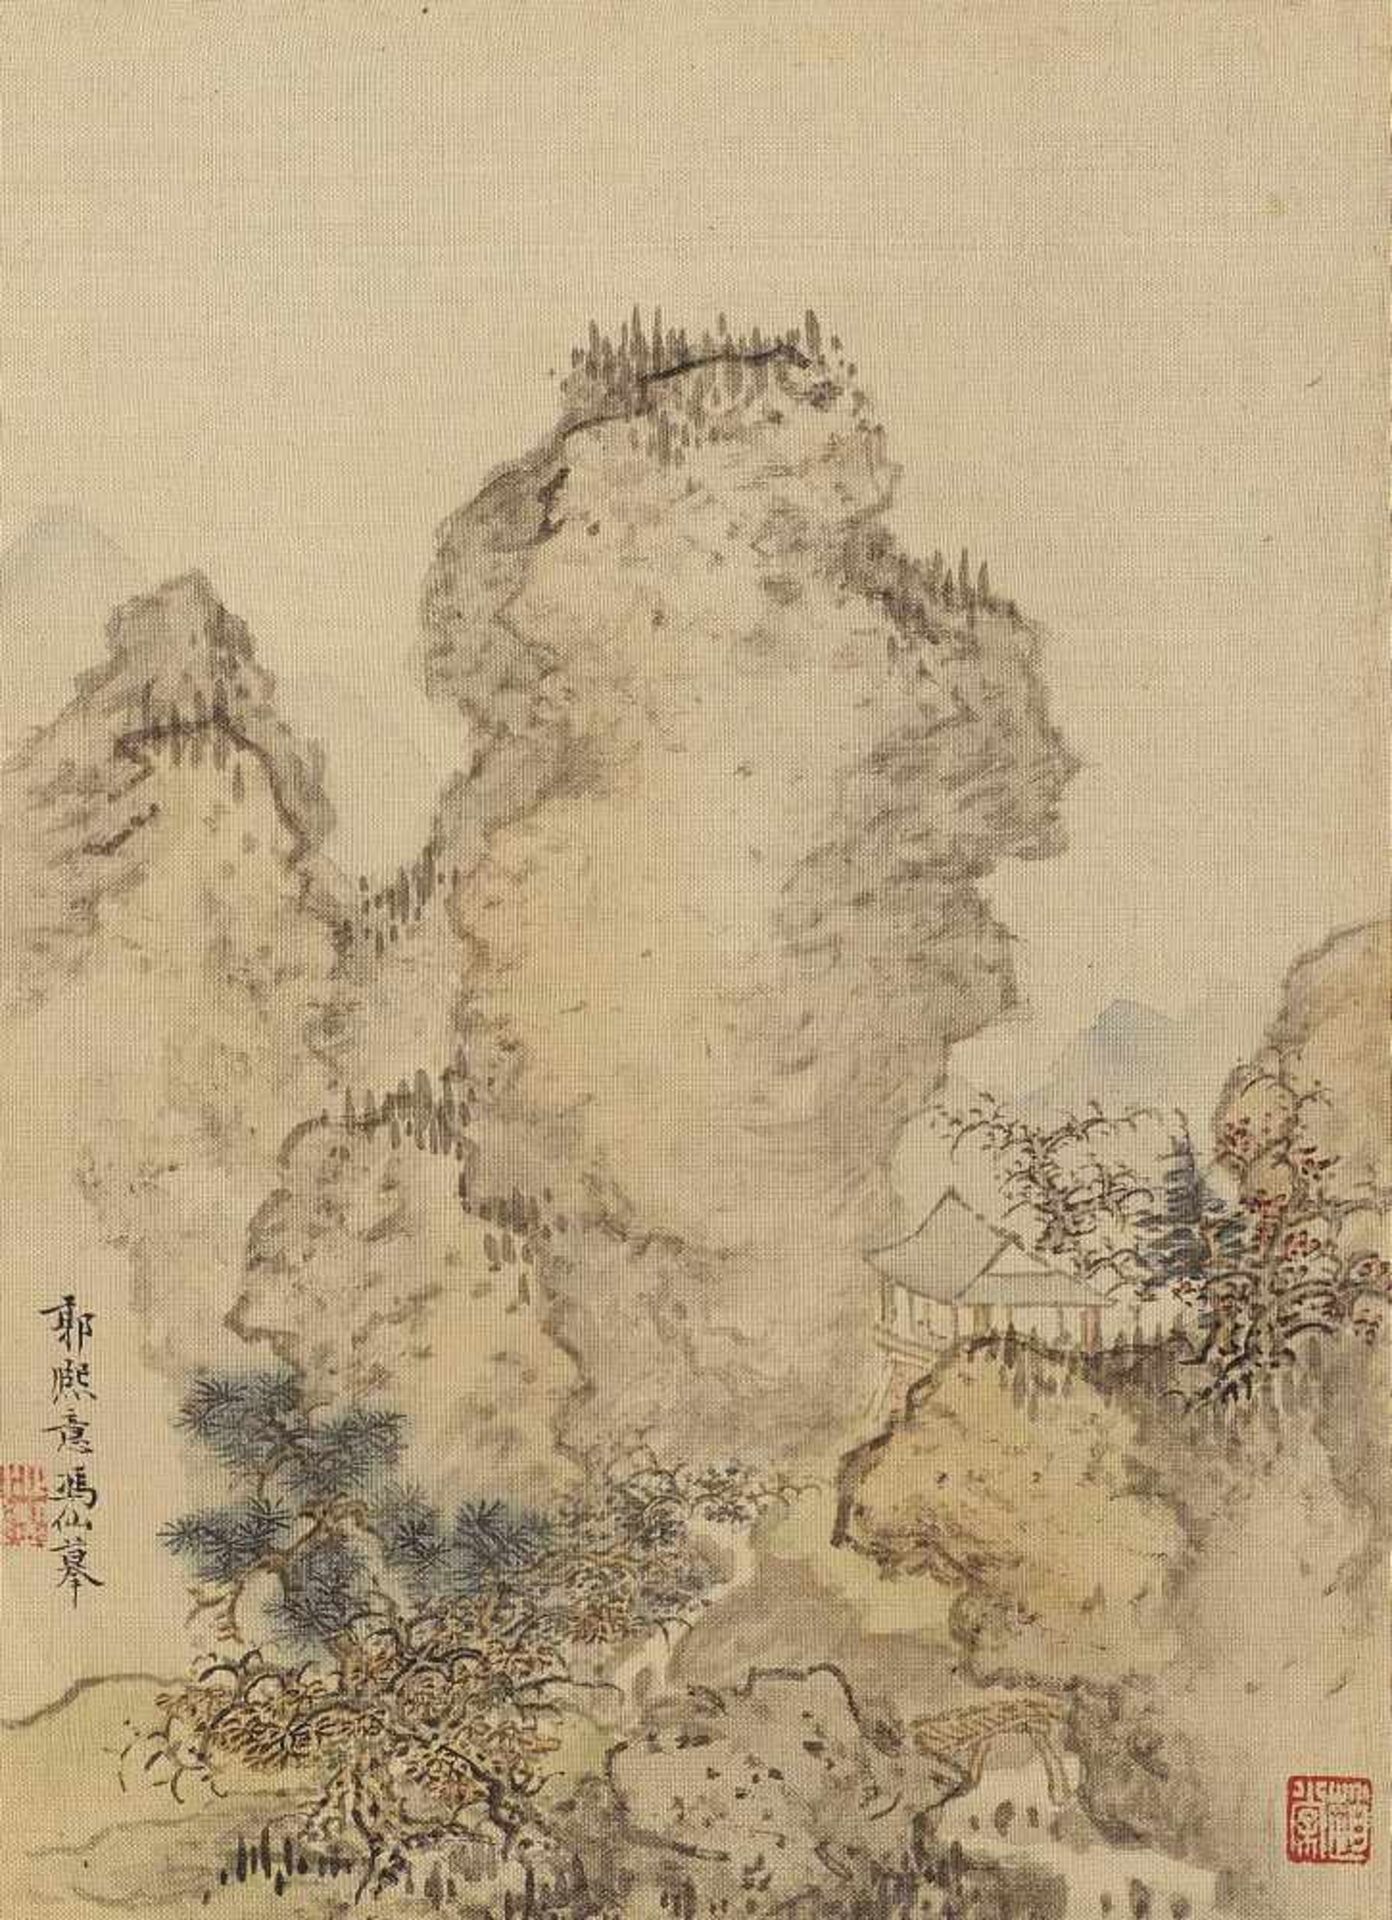 FOUR MOUNTAIN LANDSCAPES. Japan. 19th/20th c. Ink and colors on paper resp. silk. Mounted as hanging